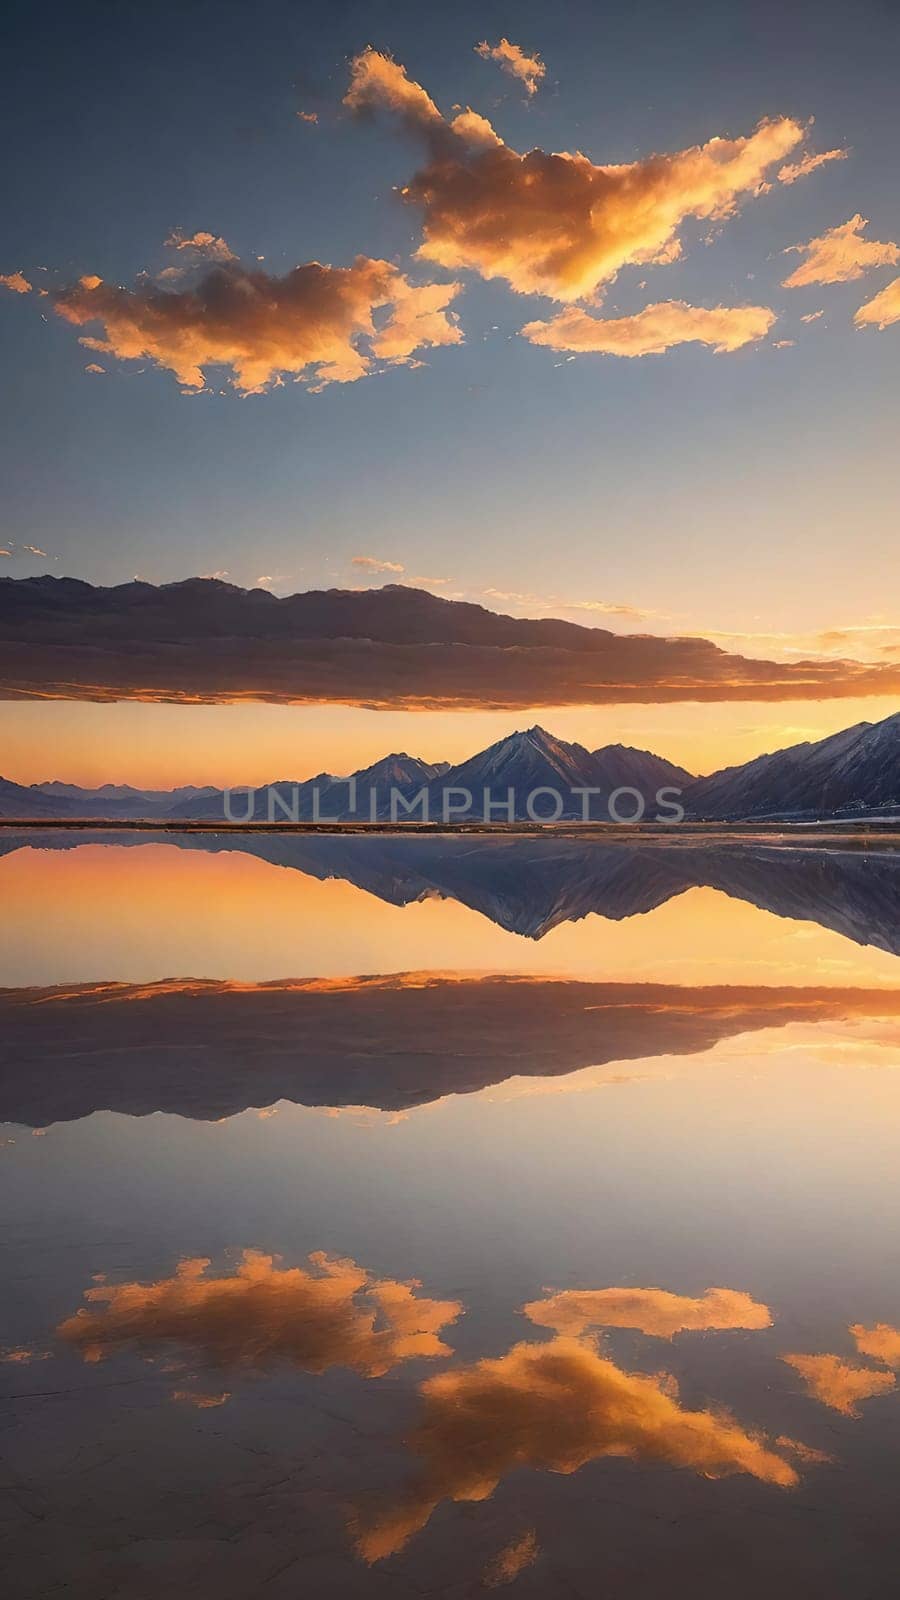 Sunset reflected in a lake with clouds and mountains in the background by yilmazsavaskandag